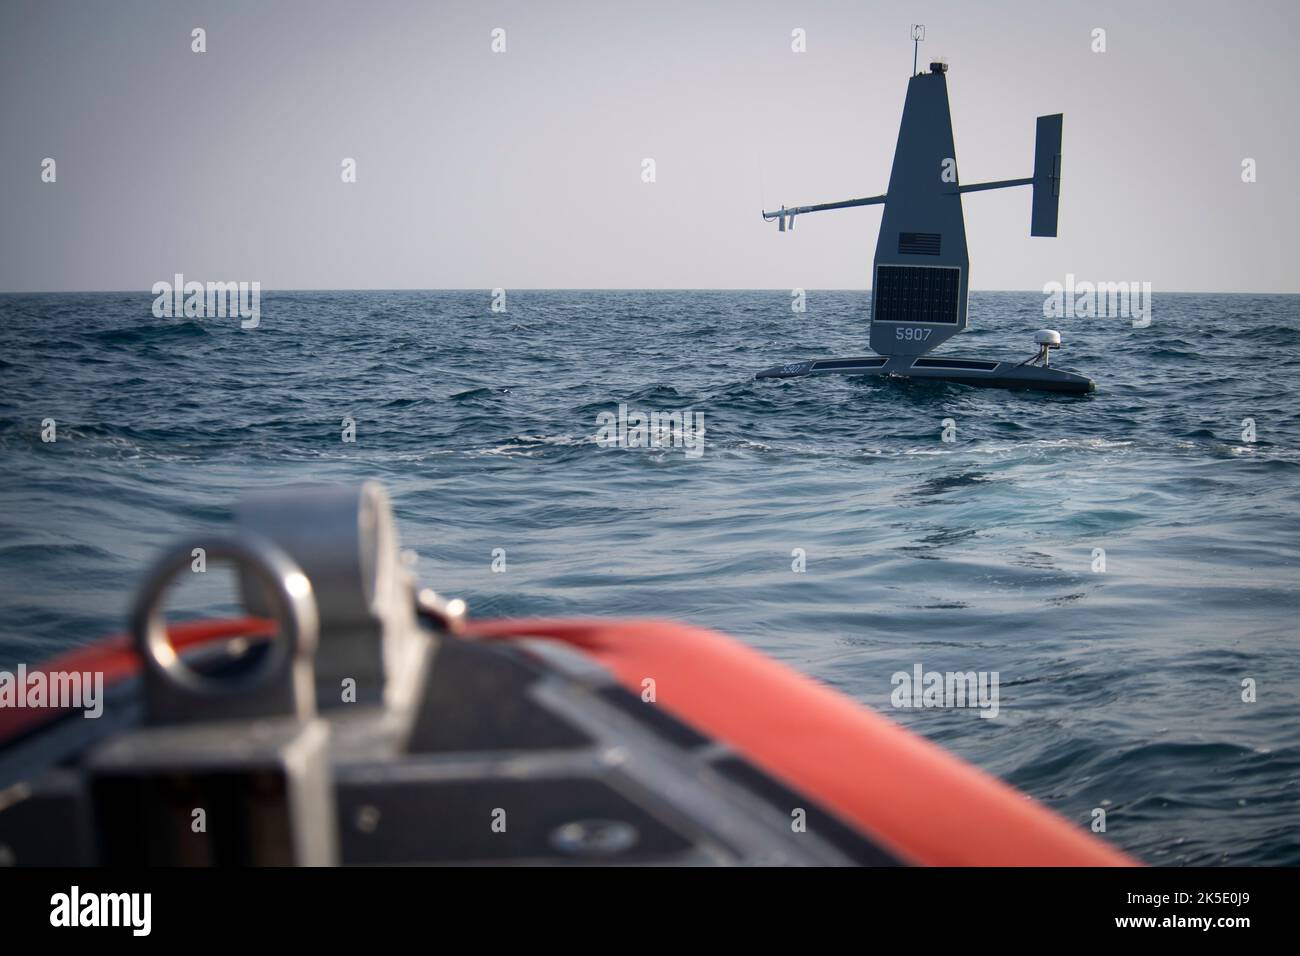 Arabian Gulf, Baharain. 07th Oct, 2022. Arabian Gulf, Baharain. 07 October, 2022. A U.S. Navy Saildrone Explorer unmanned surface vessel sails during exercise Phantom Scope in the Arabian Gulf, October 7, 2022 off the coast of Bahrain. The one-day joint exercise with the U.S and United Kingdom navies combined unmanned and manned vessels. Credit: MCS Roland Franklin/US Navy/Alamy Live News Stock Photo